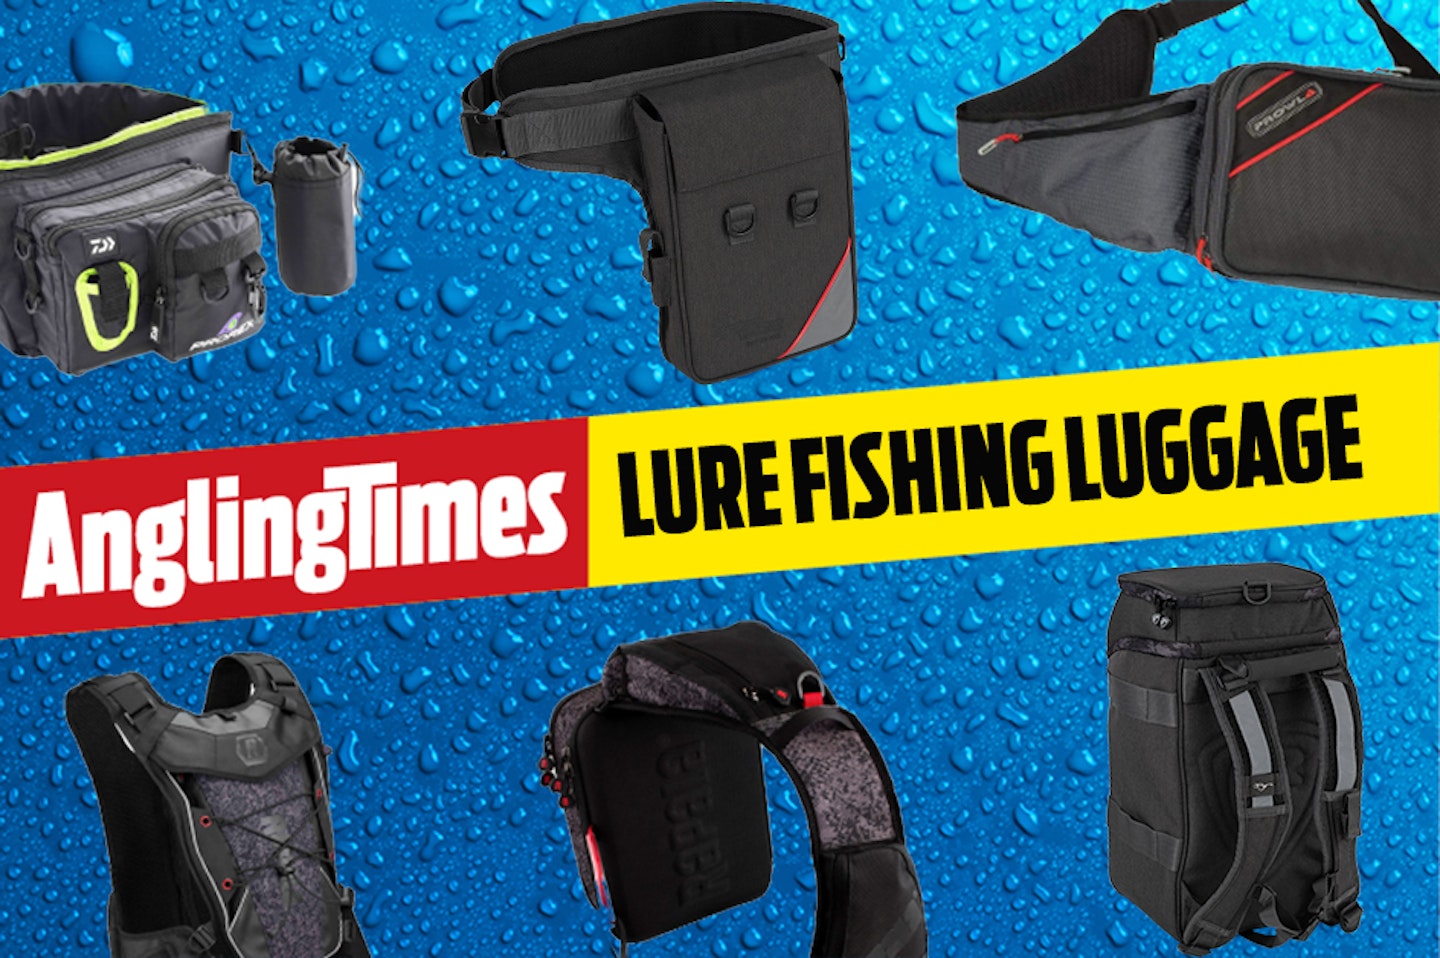 The best lure fishing luggage